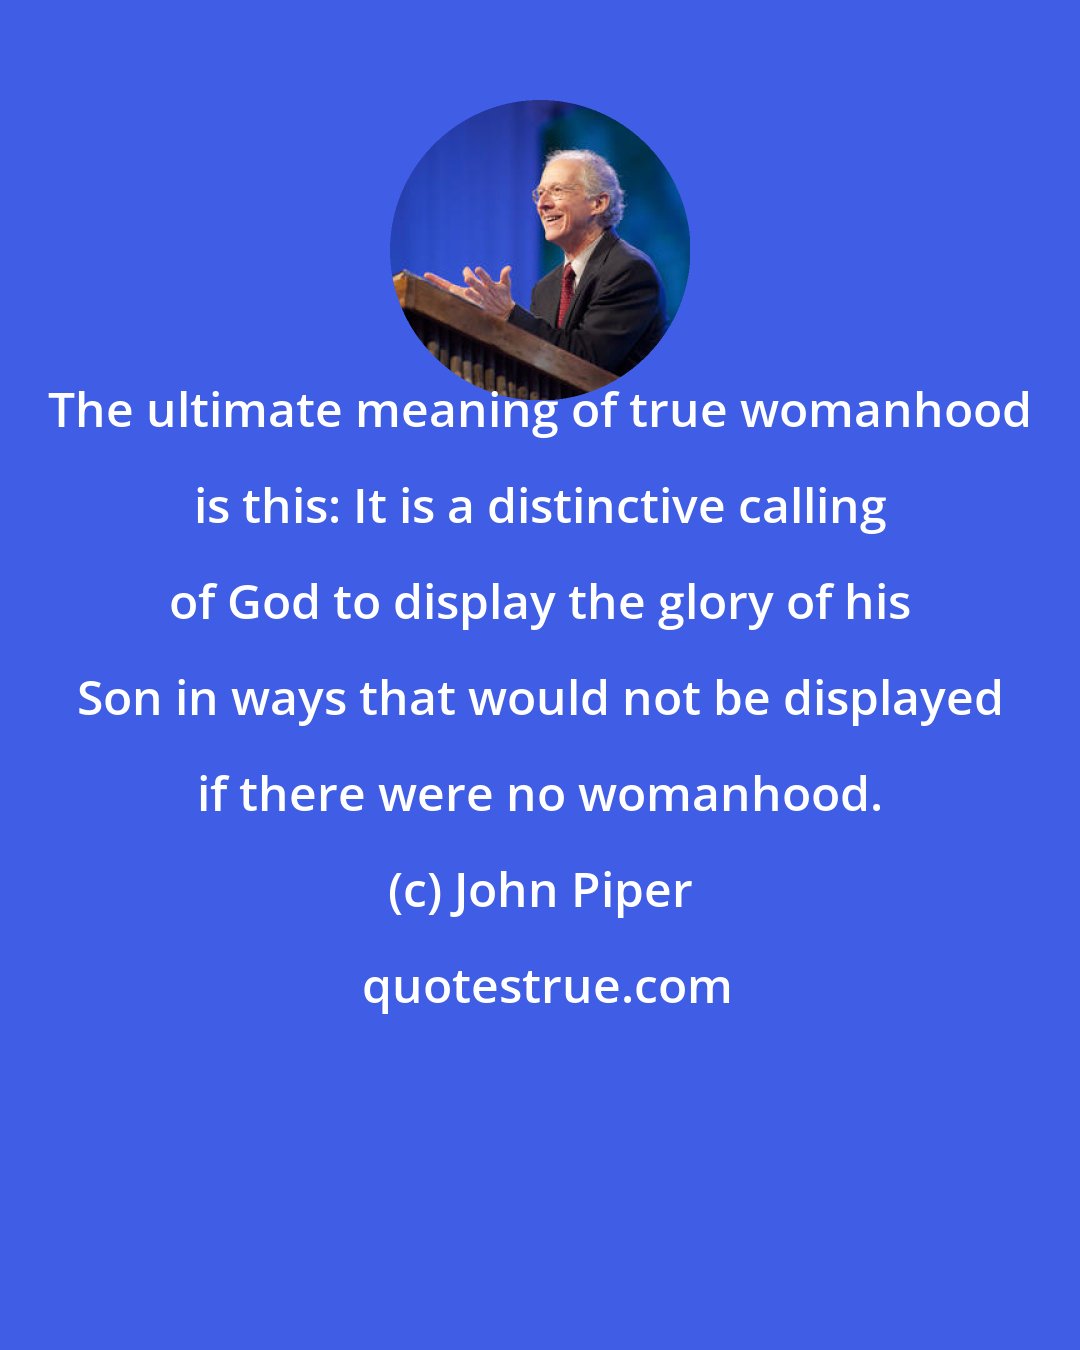 John Piper: The ultimate meaning of true womanhood is this: It is a distinctive calling of God to display the glory of his Son in ways that would not be displayed if there were no womanhood.